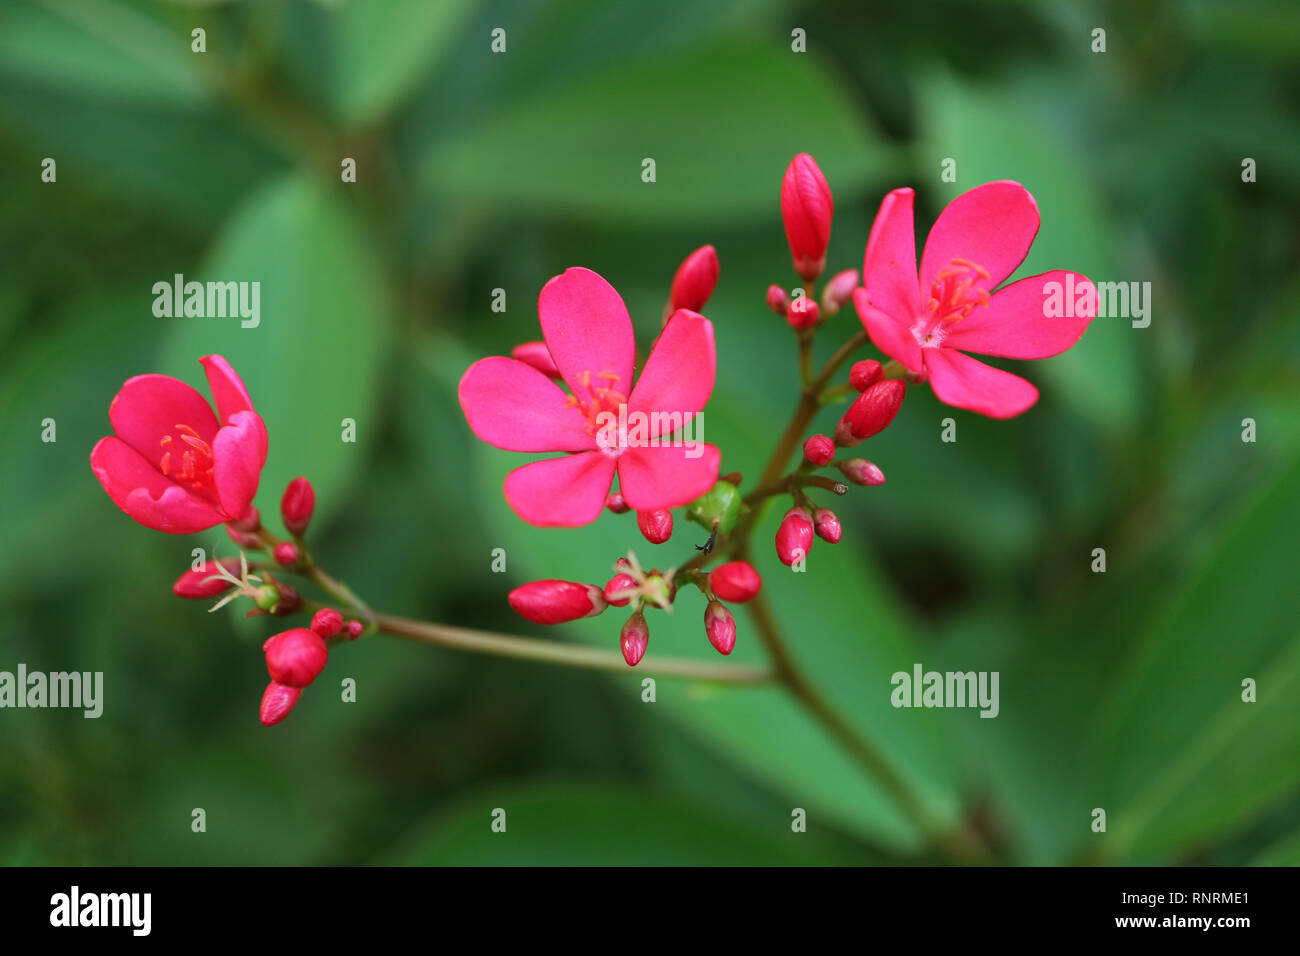 Three of Blooming Jatropha Flowers with Bunch of Flower Buds on Blurry Green Foliage in Background Stock Photo